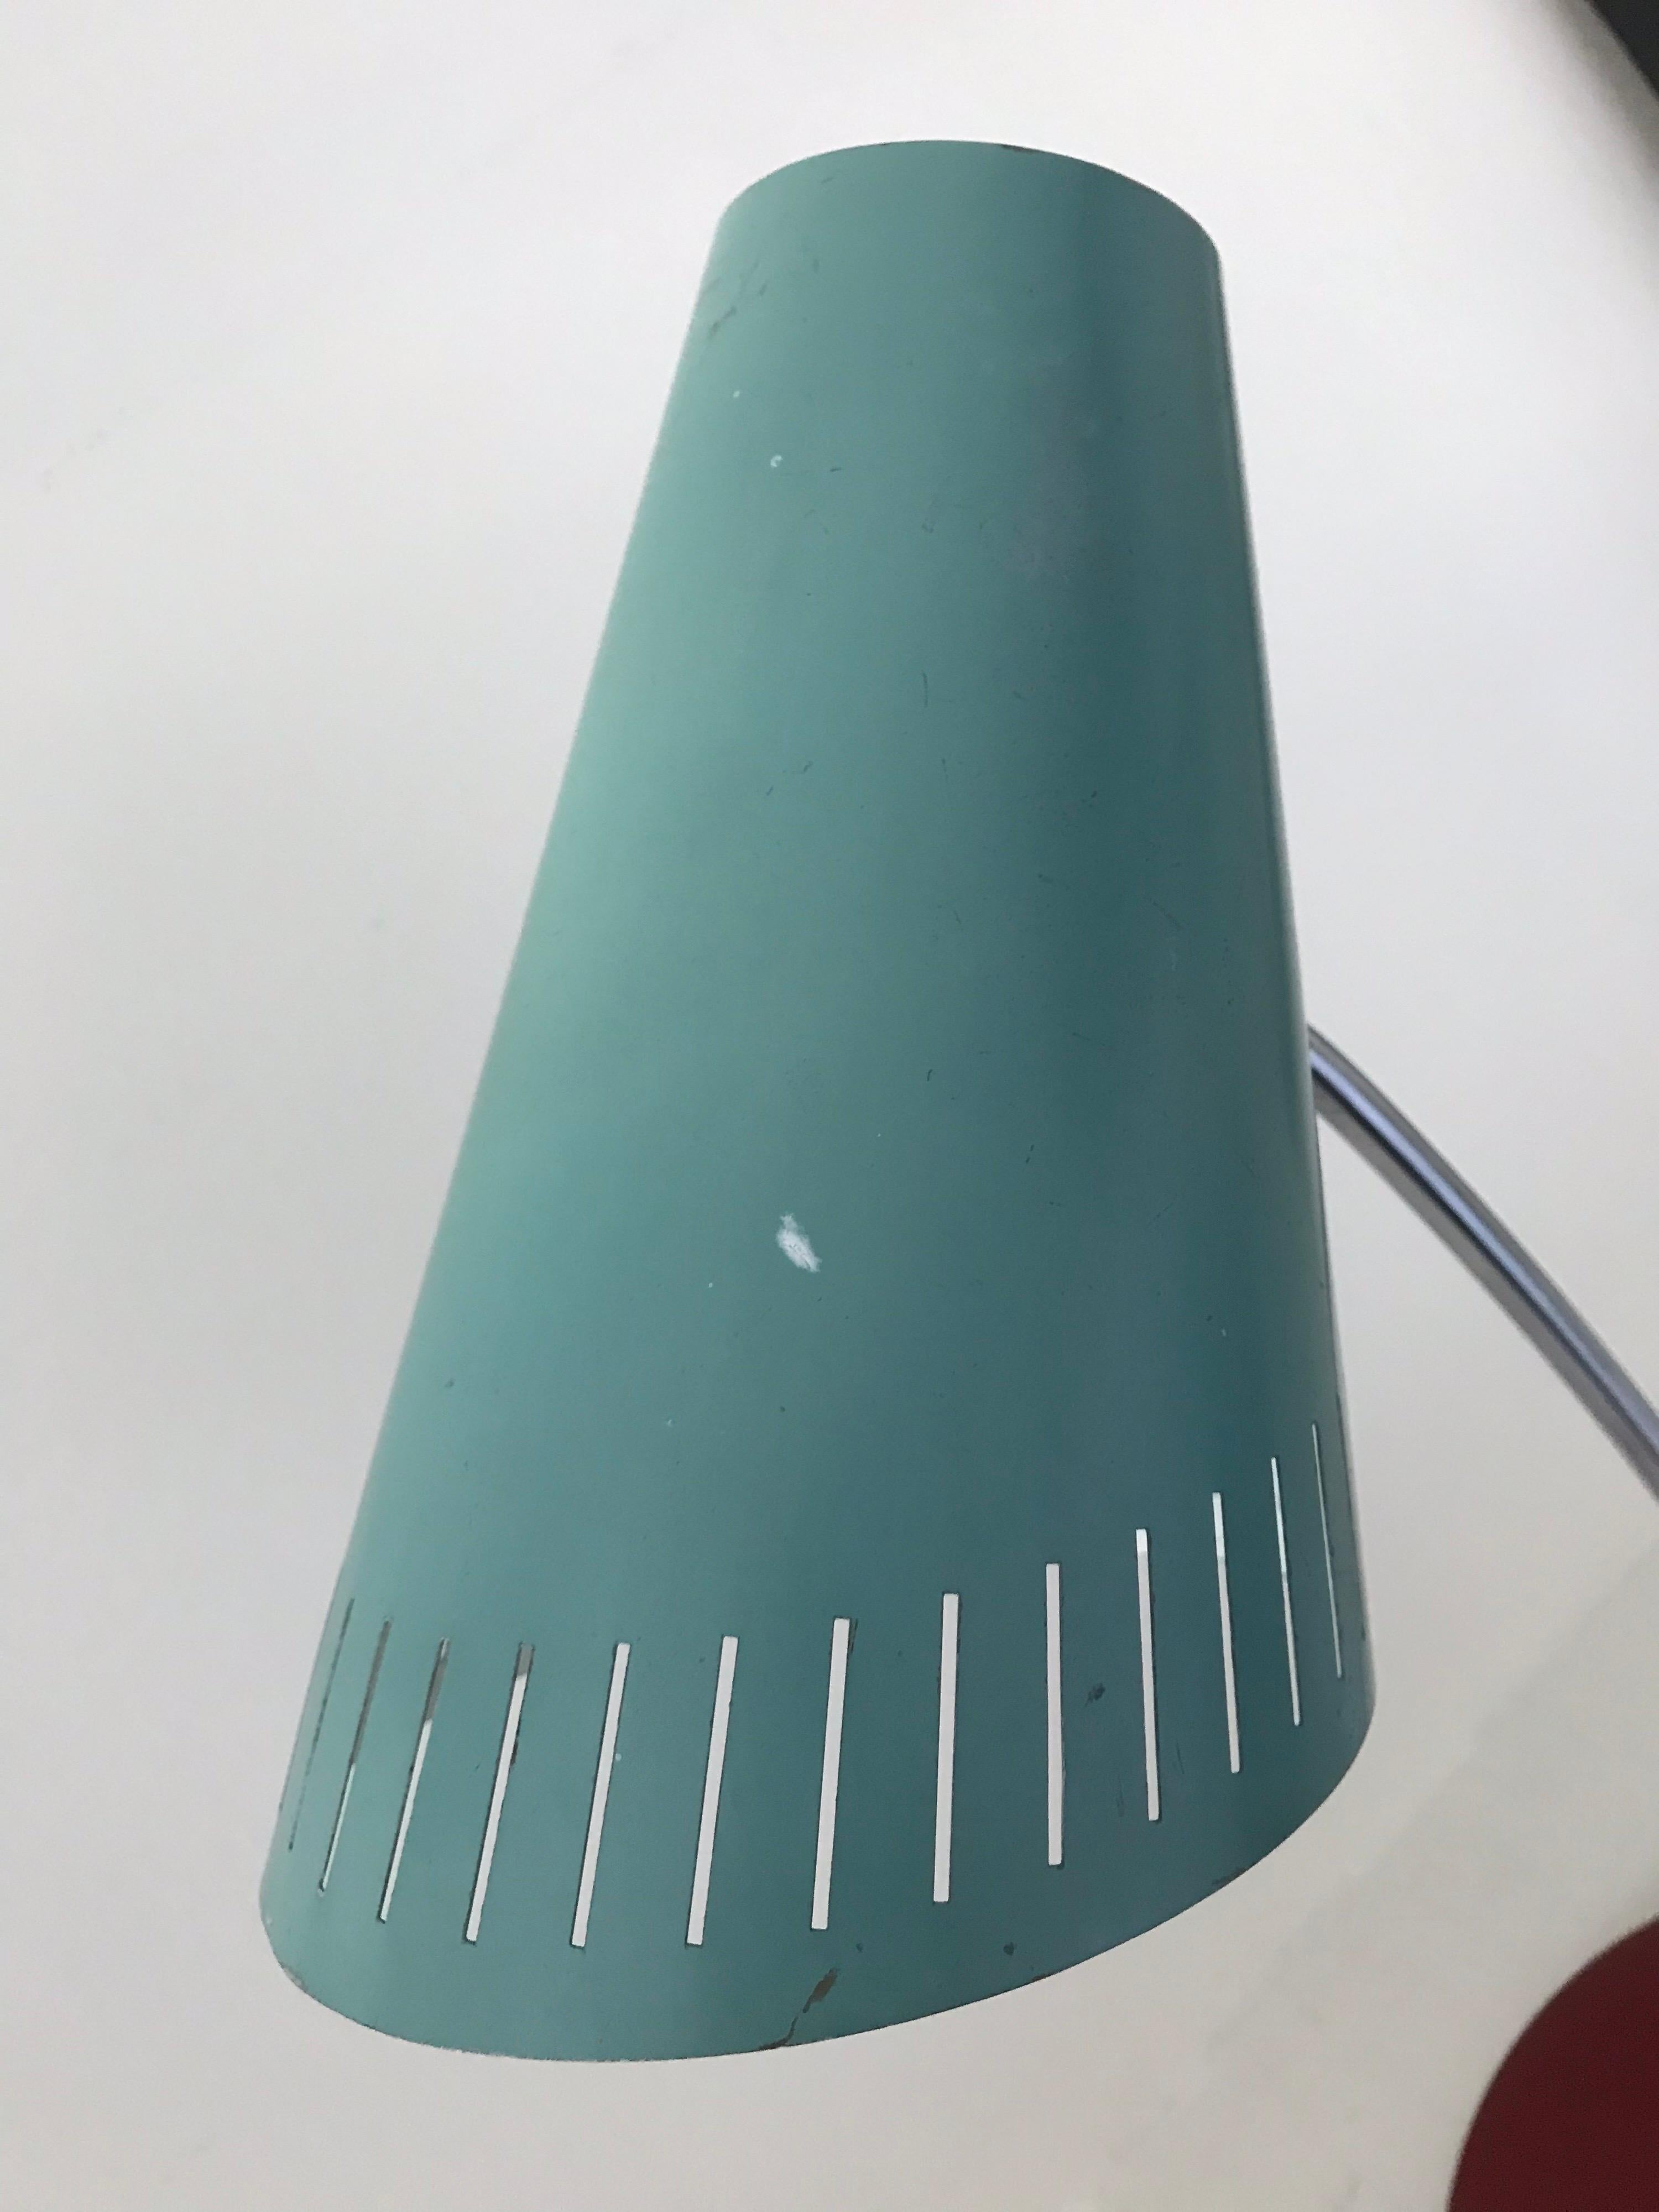 Painted Mid-Century Modern Cone Shaped Desk Lamp, Turquoise and Red, Russia, 1966 For Sale